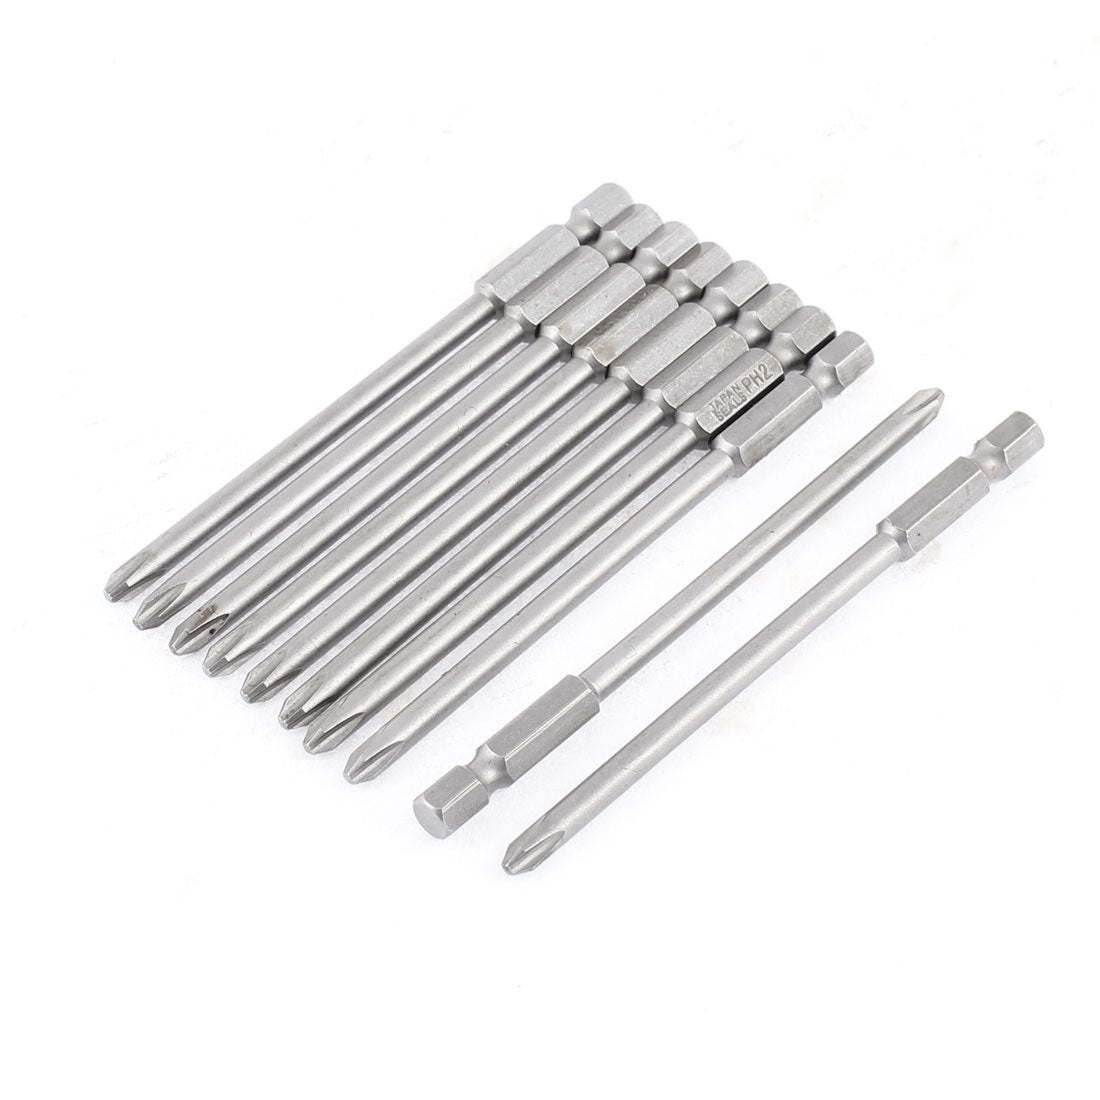 uxcell Uxcell 10pcs PH2 4.5mm Magnetic Tip Extra Long Phillips Screwdriver Bit Tool